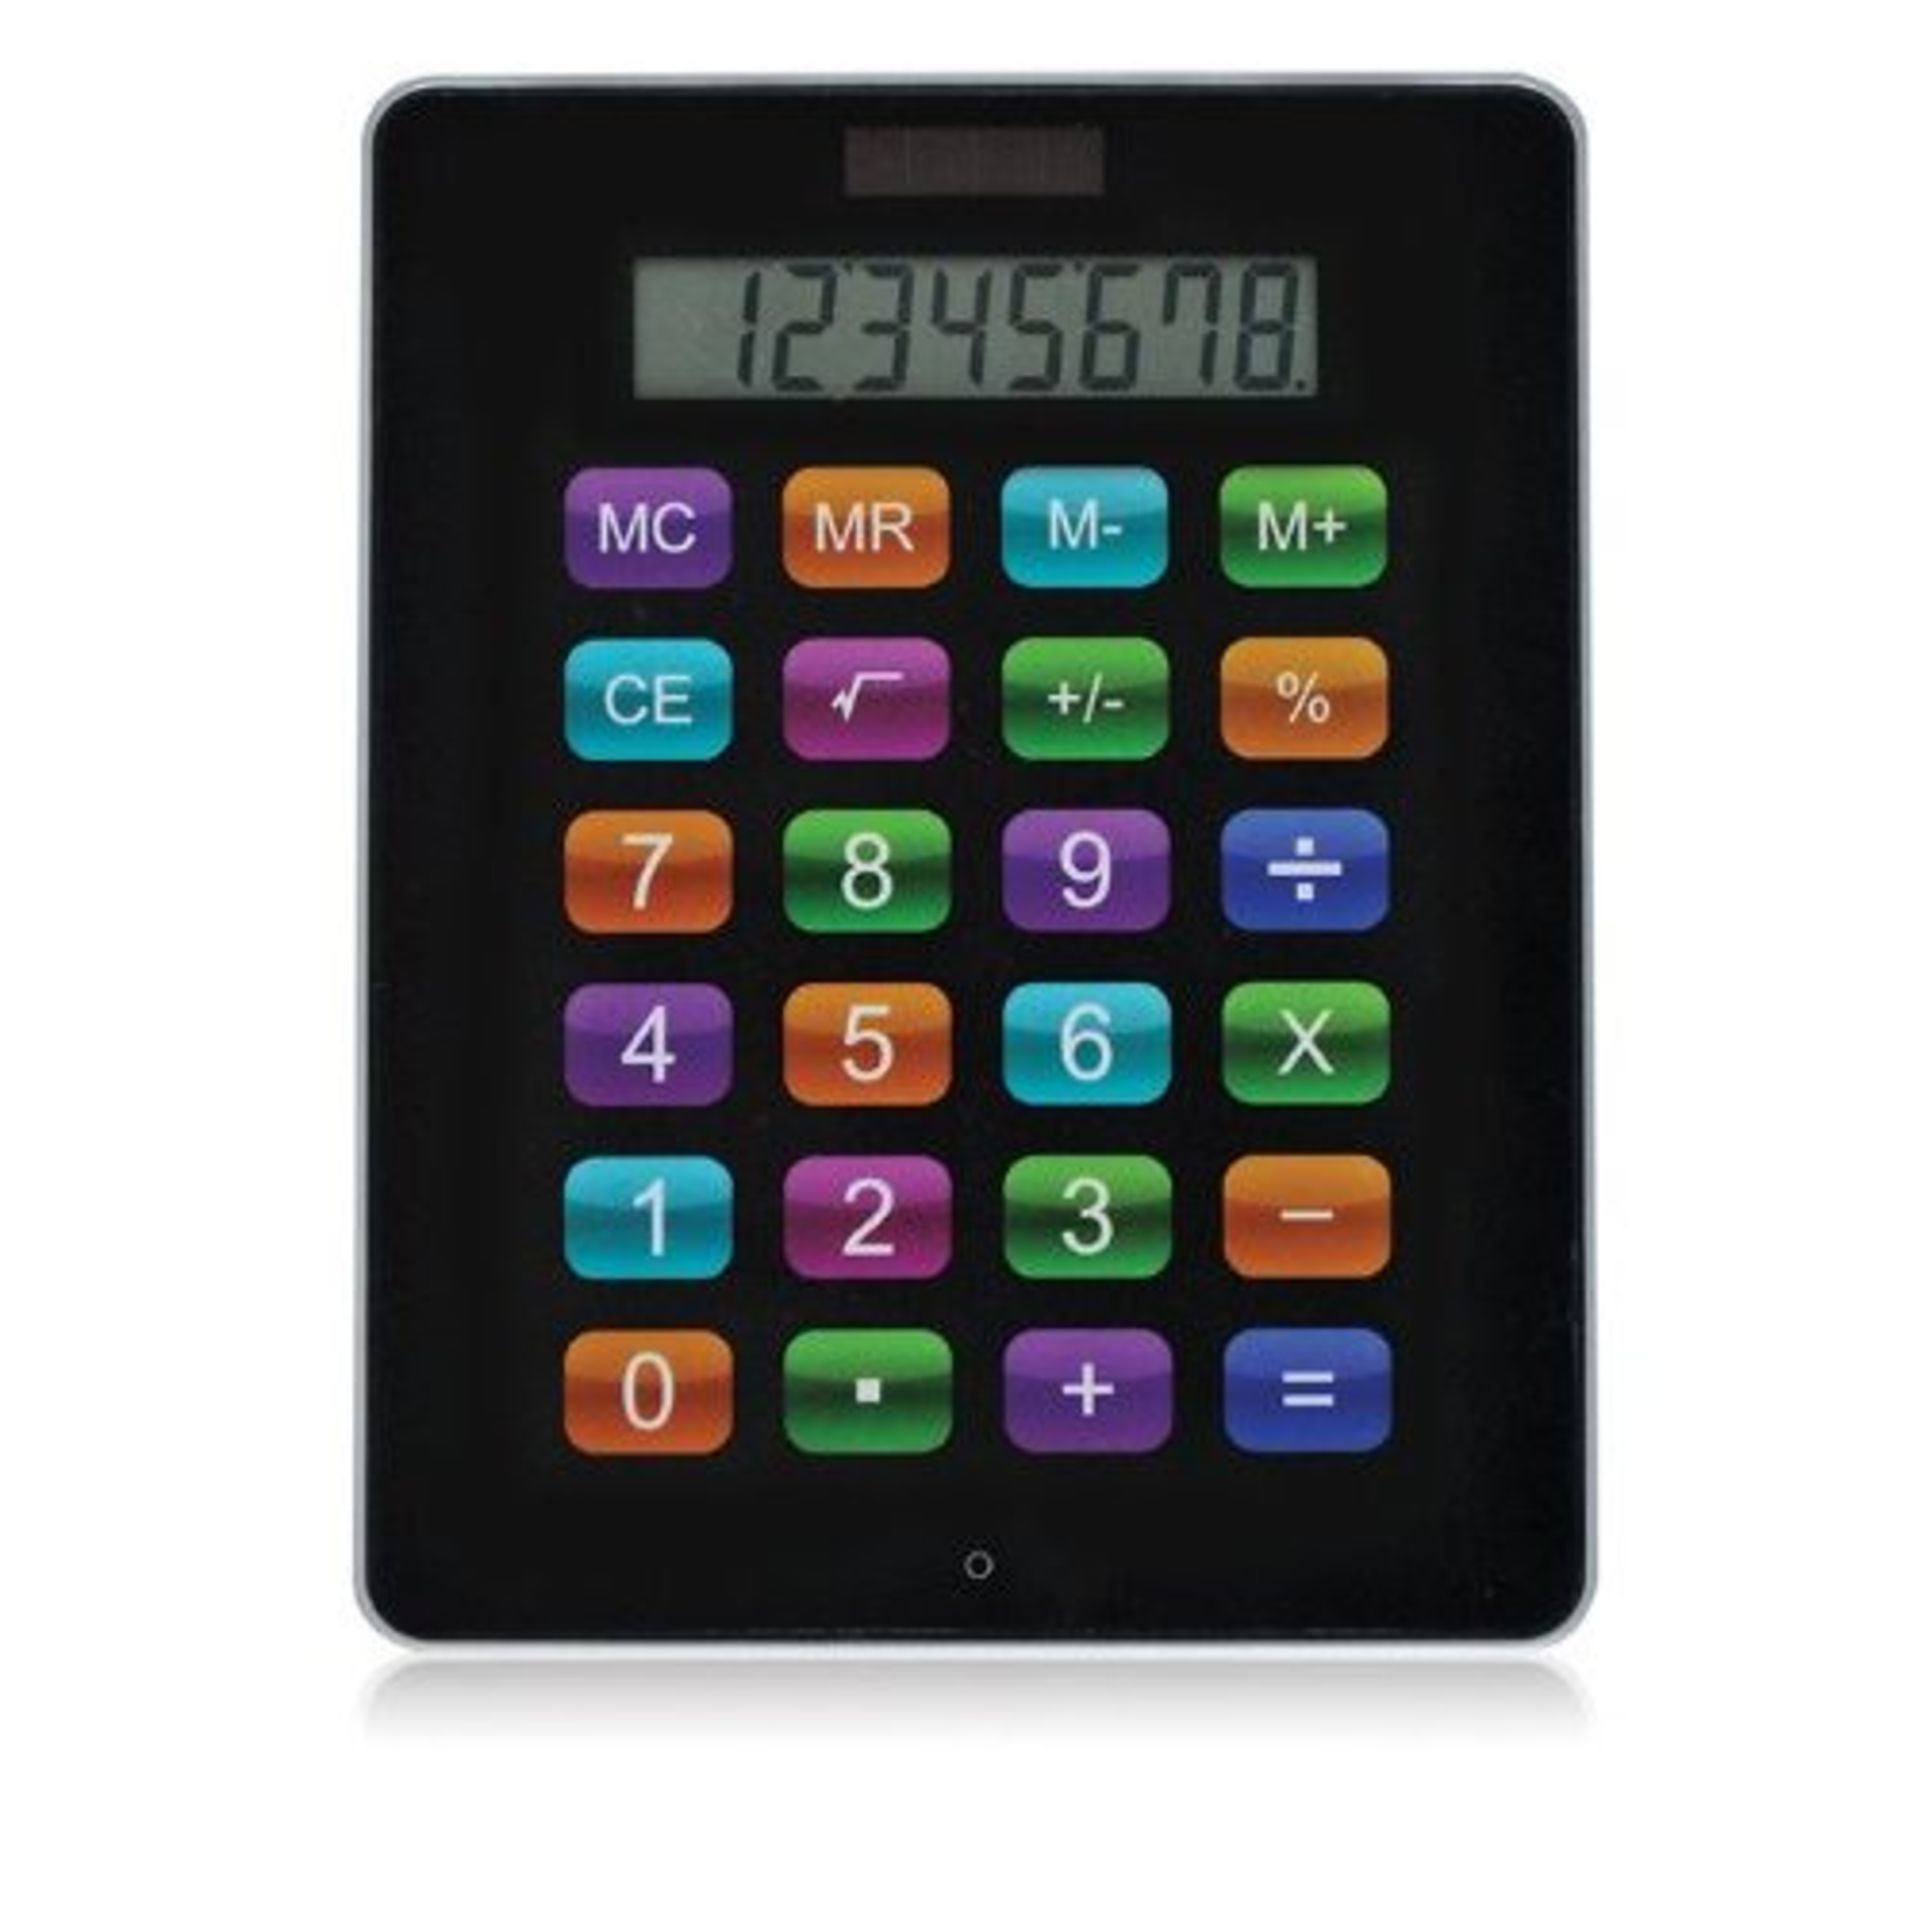 V *TRADE QTY* Brand New Ipad Calculator-Battery powered with solar backup X 20 YOUR BID PRICE TO